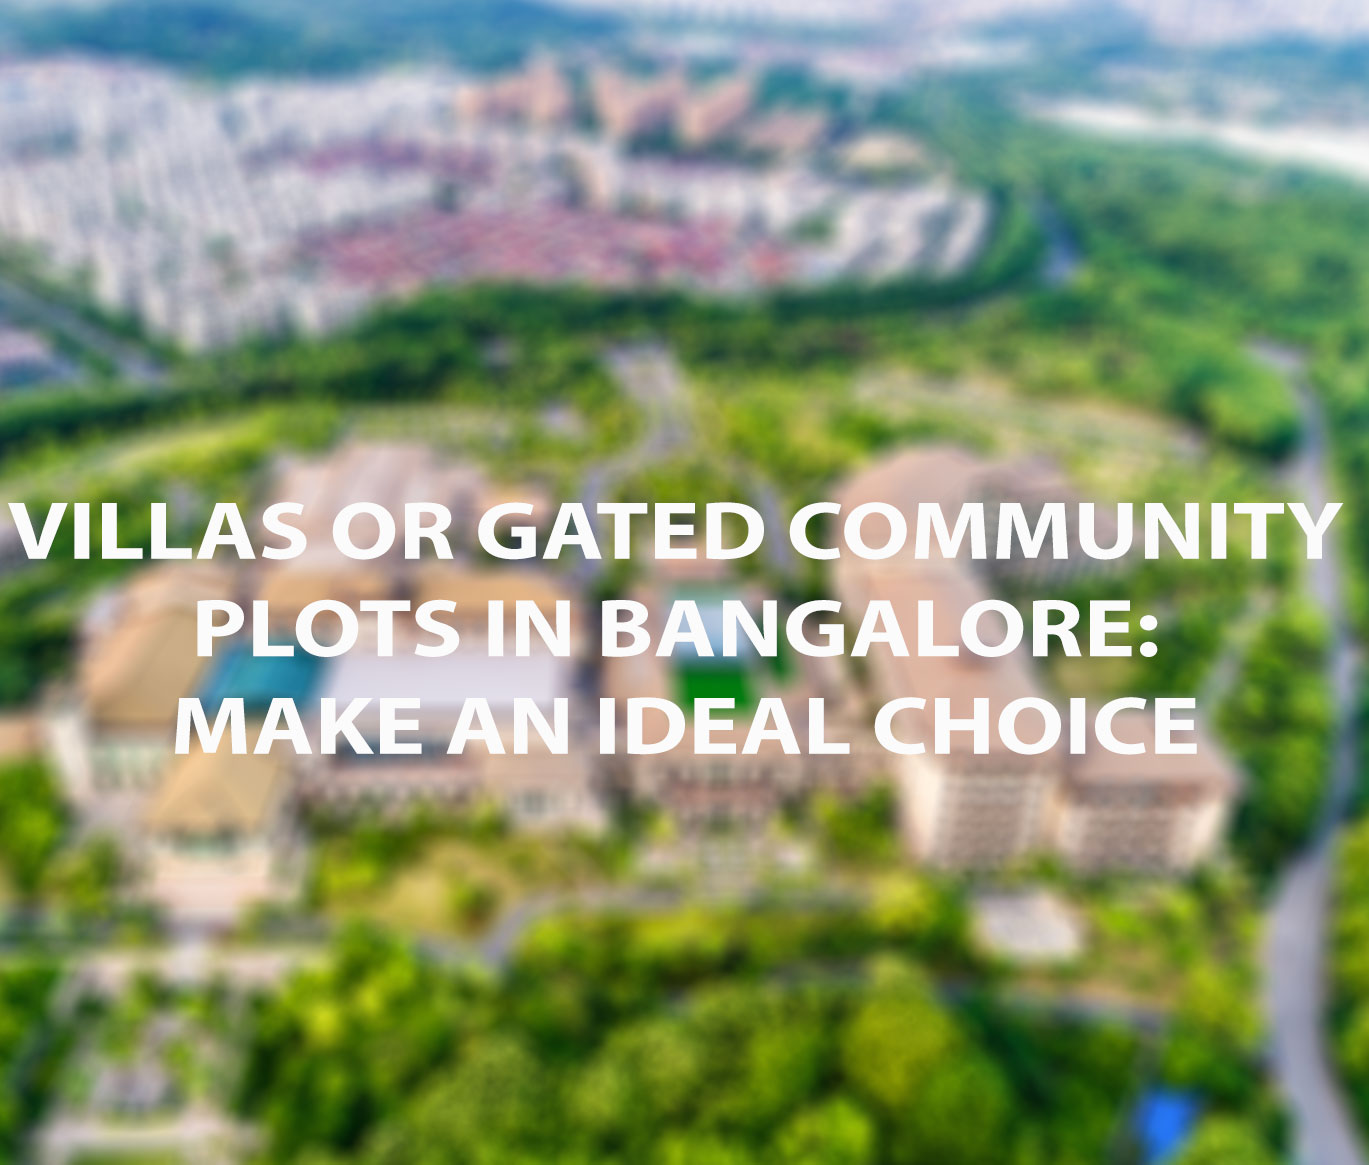 Villas or gated community plots in Bangalore: Make an ideal choice